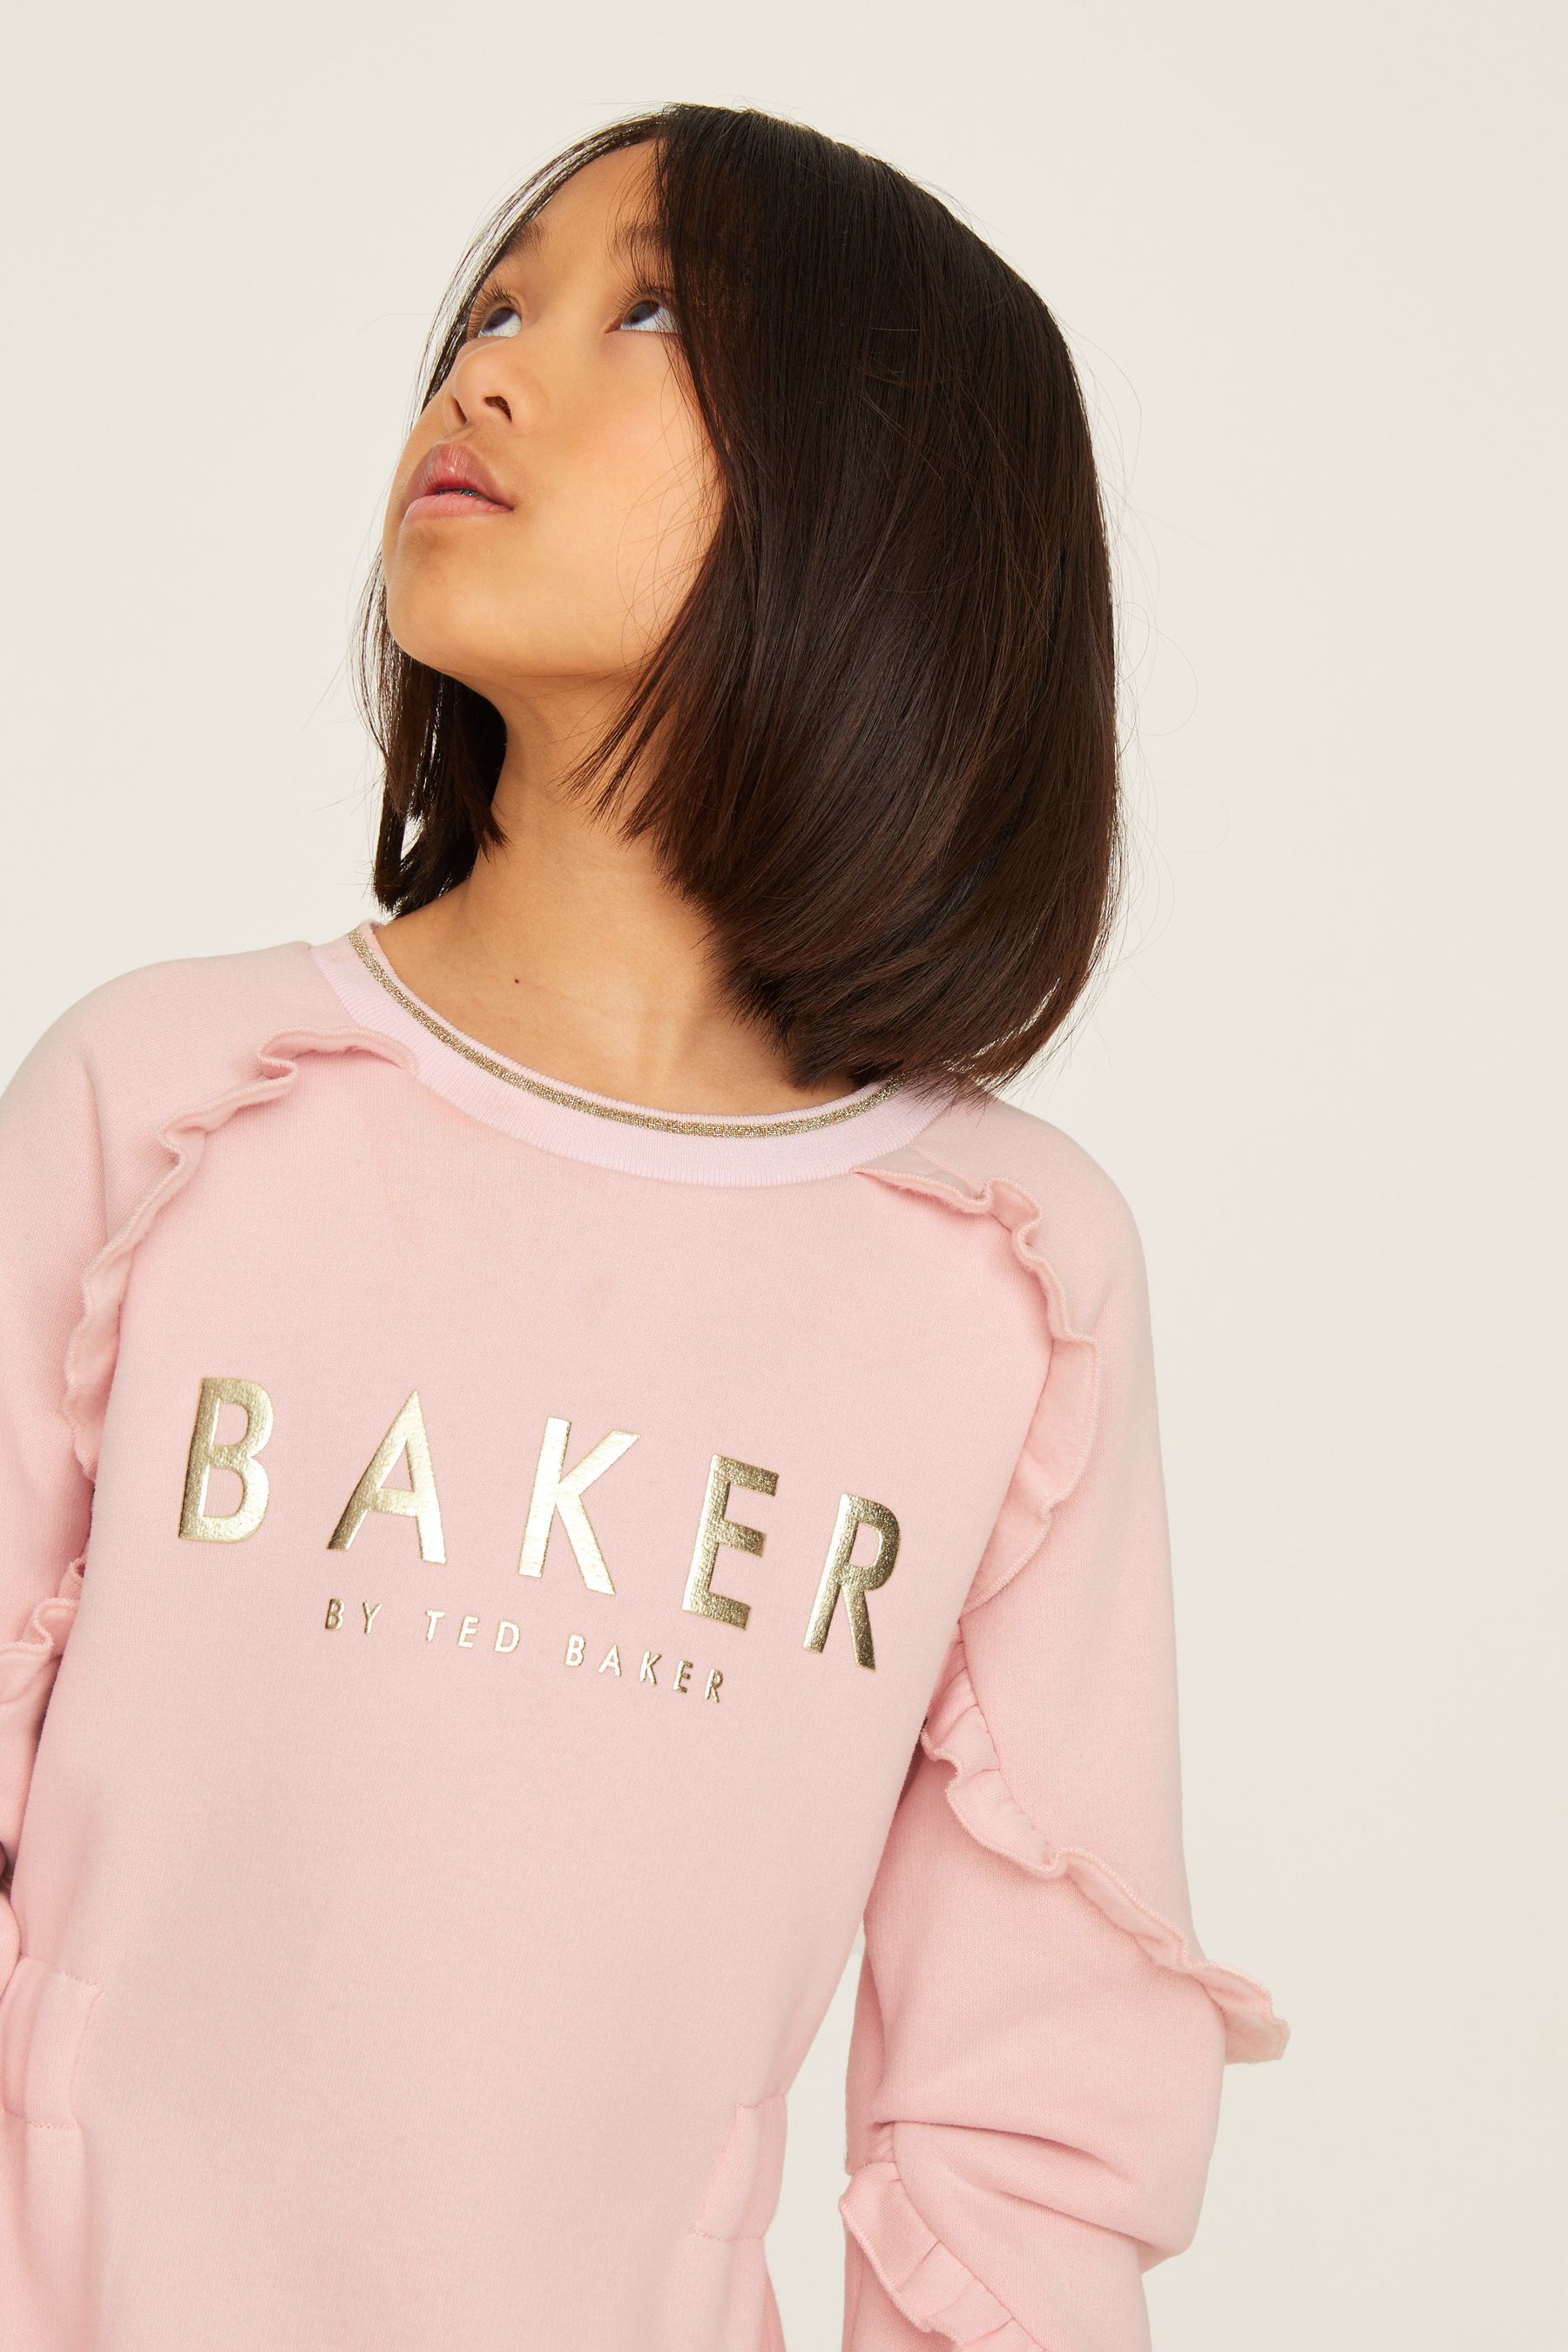 Buy Baker by Ted Baker Pink Sweat Dress from the Next UK online shop